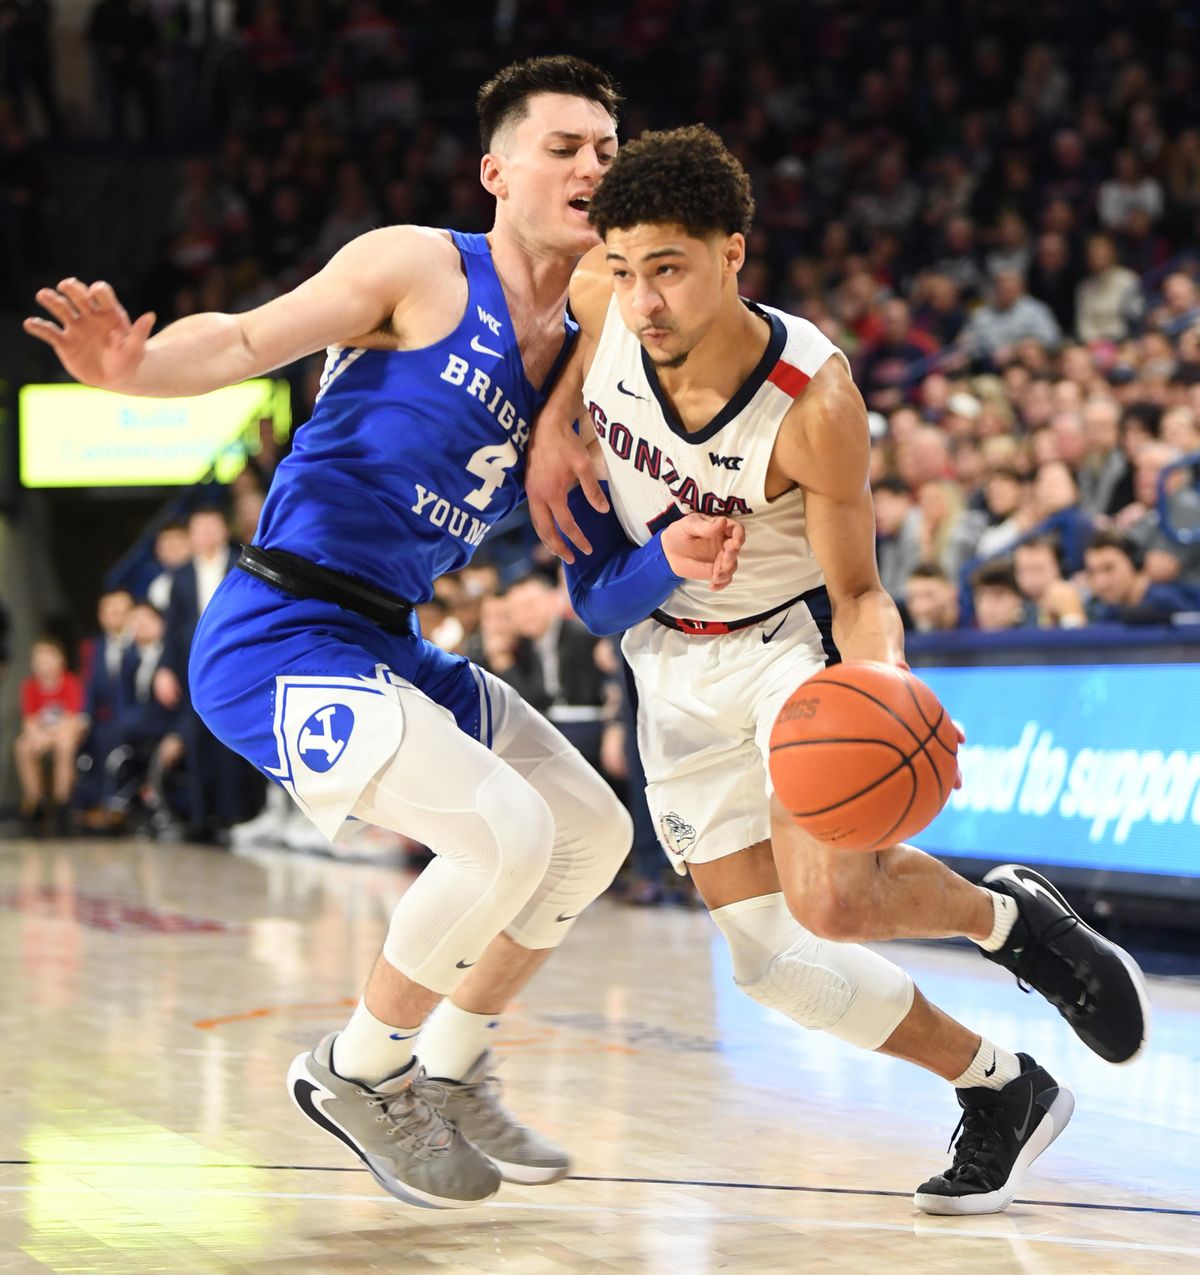 Gonzaga’s Ryan Woolridge (4), right, drives against Brigham Young University’s Alex Barcello (4) in the first half of action Saturday, Jan. 18, 2020 at the McCarthey Athletic Center at Gonzaga University in Spokane, Washington. The Zags led 38-31 at the half.  Jesse Tinsley/THE SPOKESMAN-REVIEW (Jesse Tinsley / The Spokesman-Review)